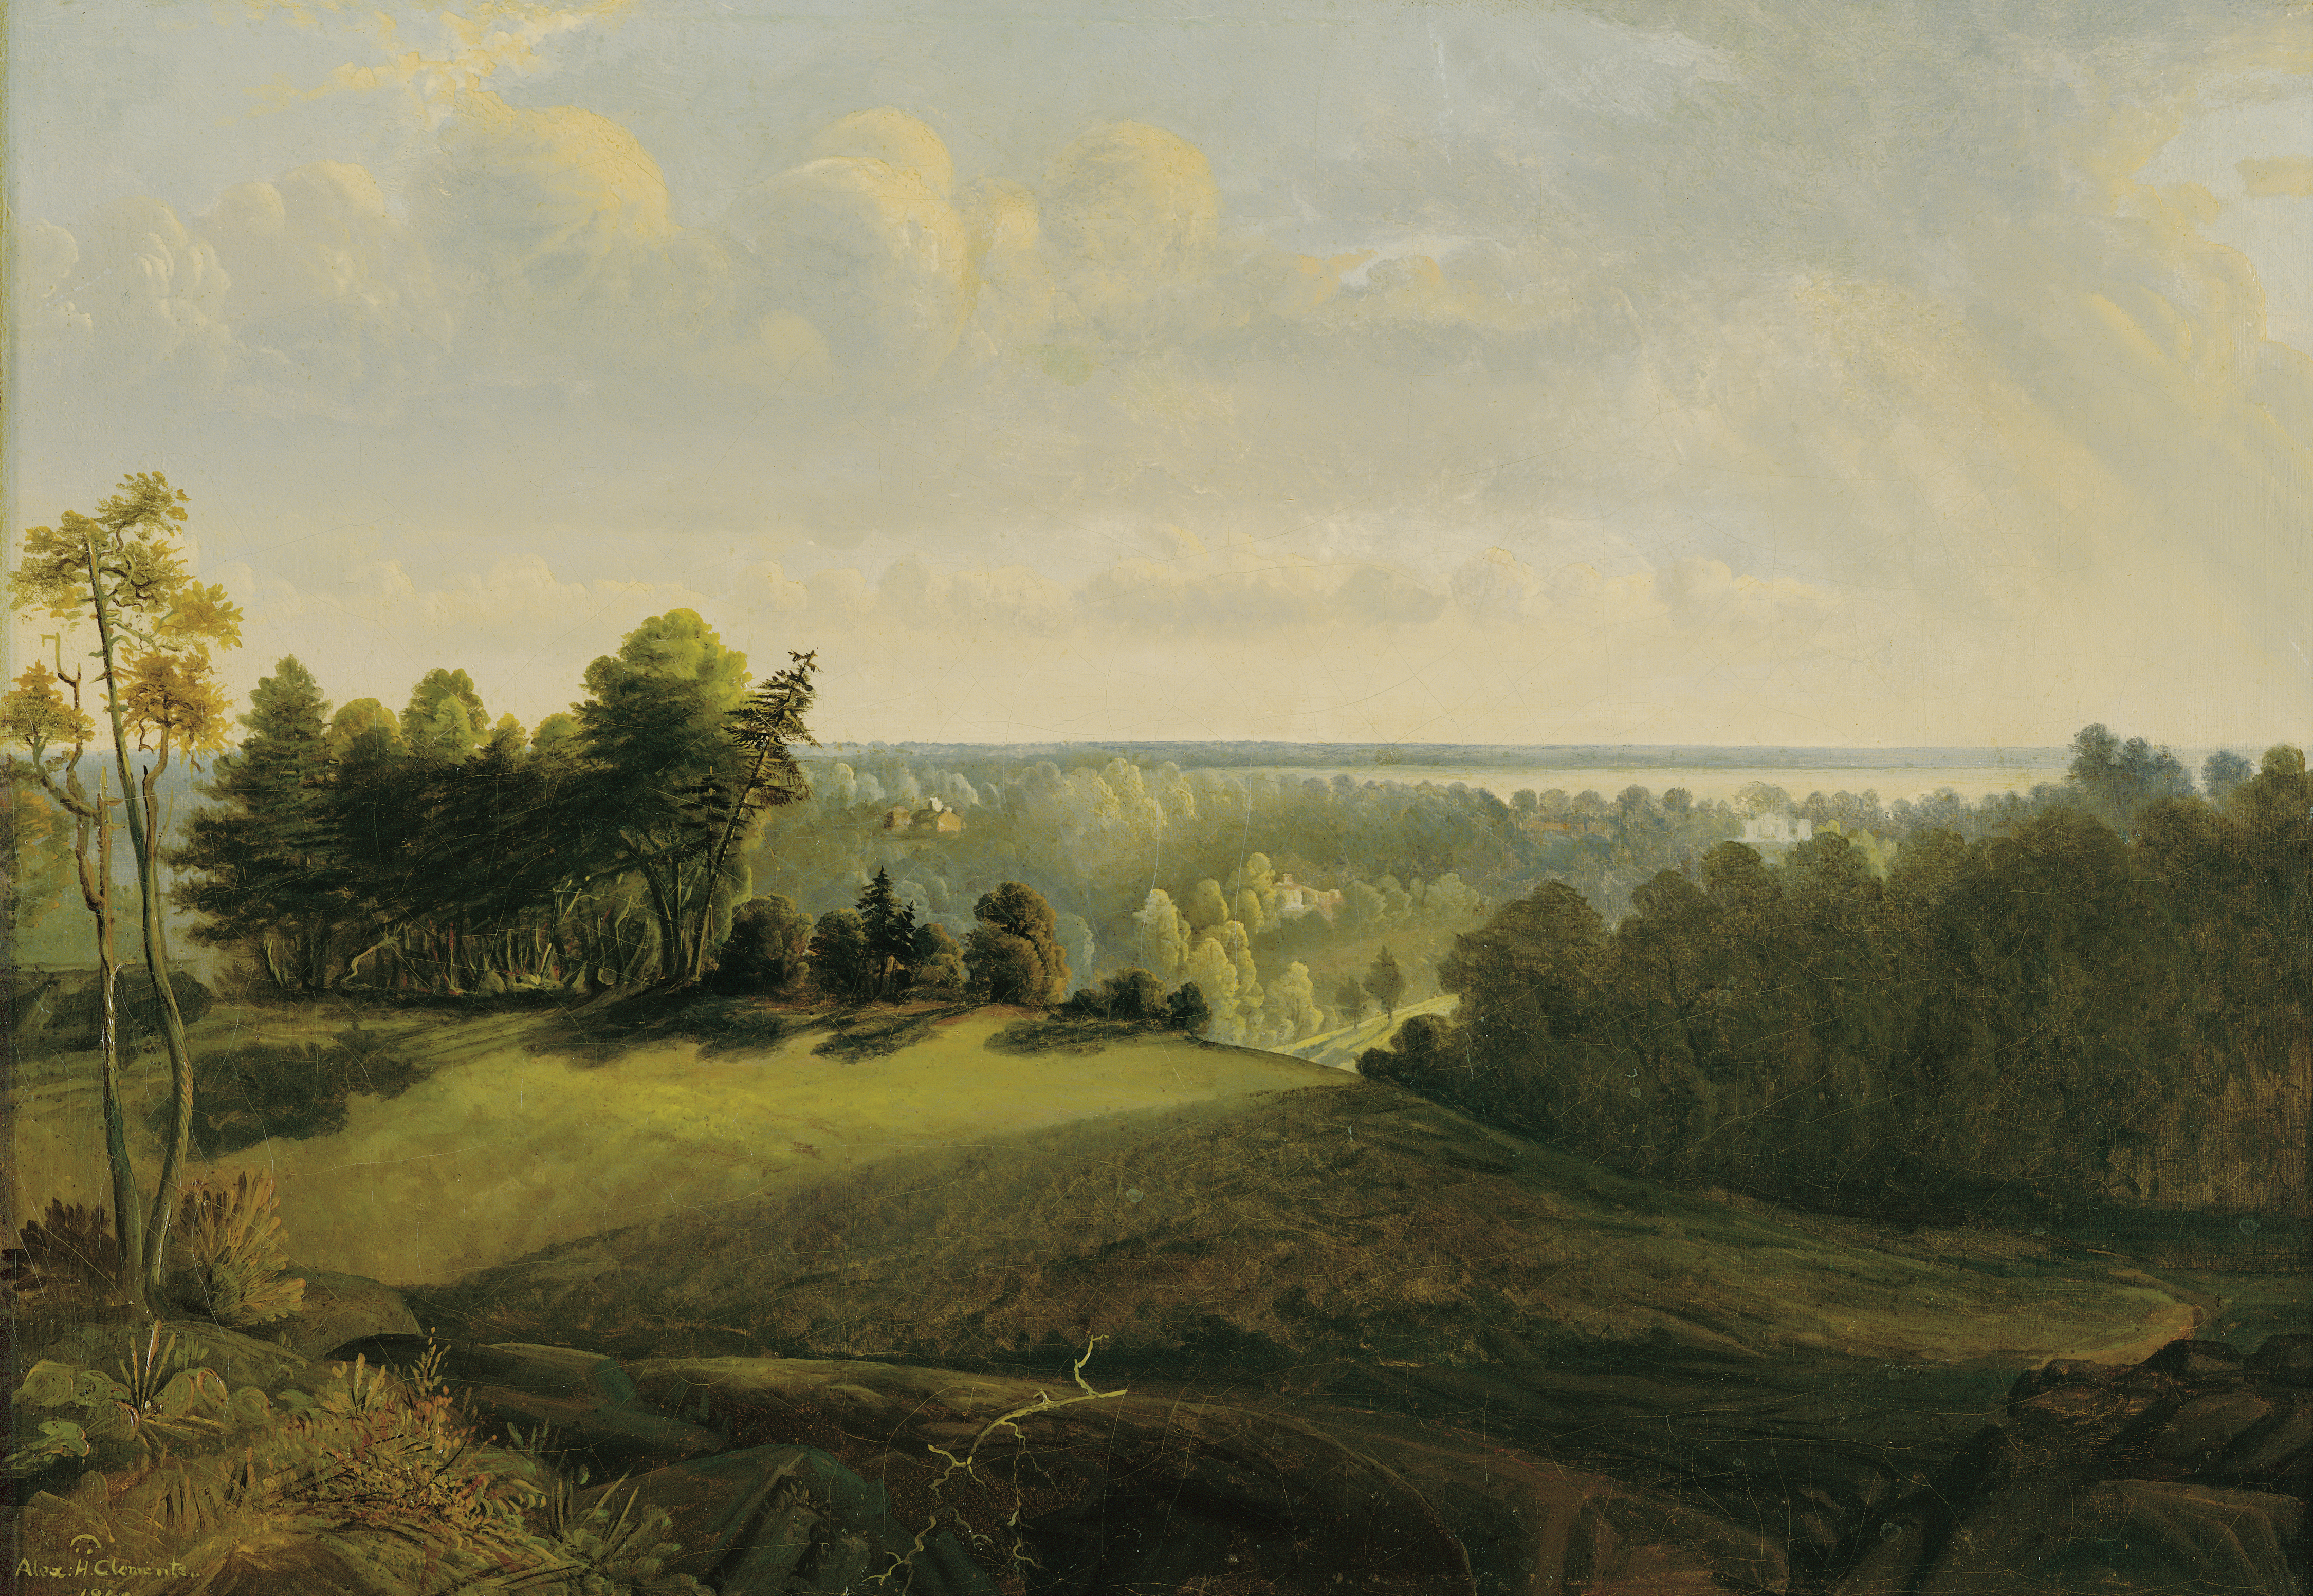 Painting of the view from a hilltop, with trees in the foreground and the Potomac River in the distance.